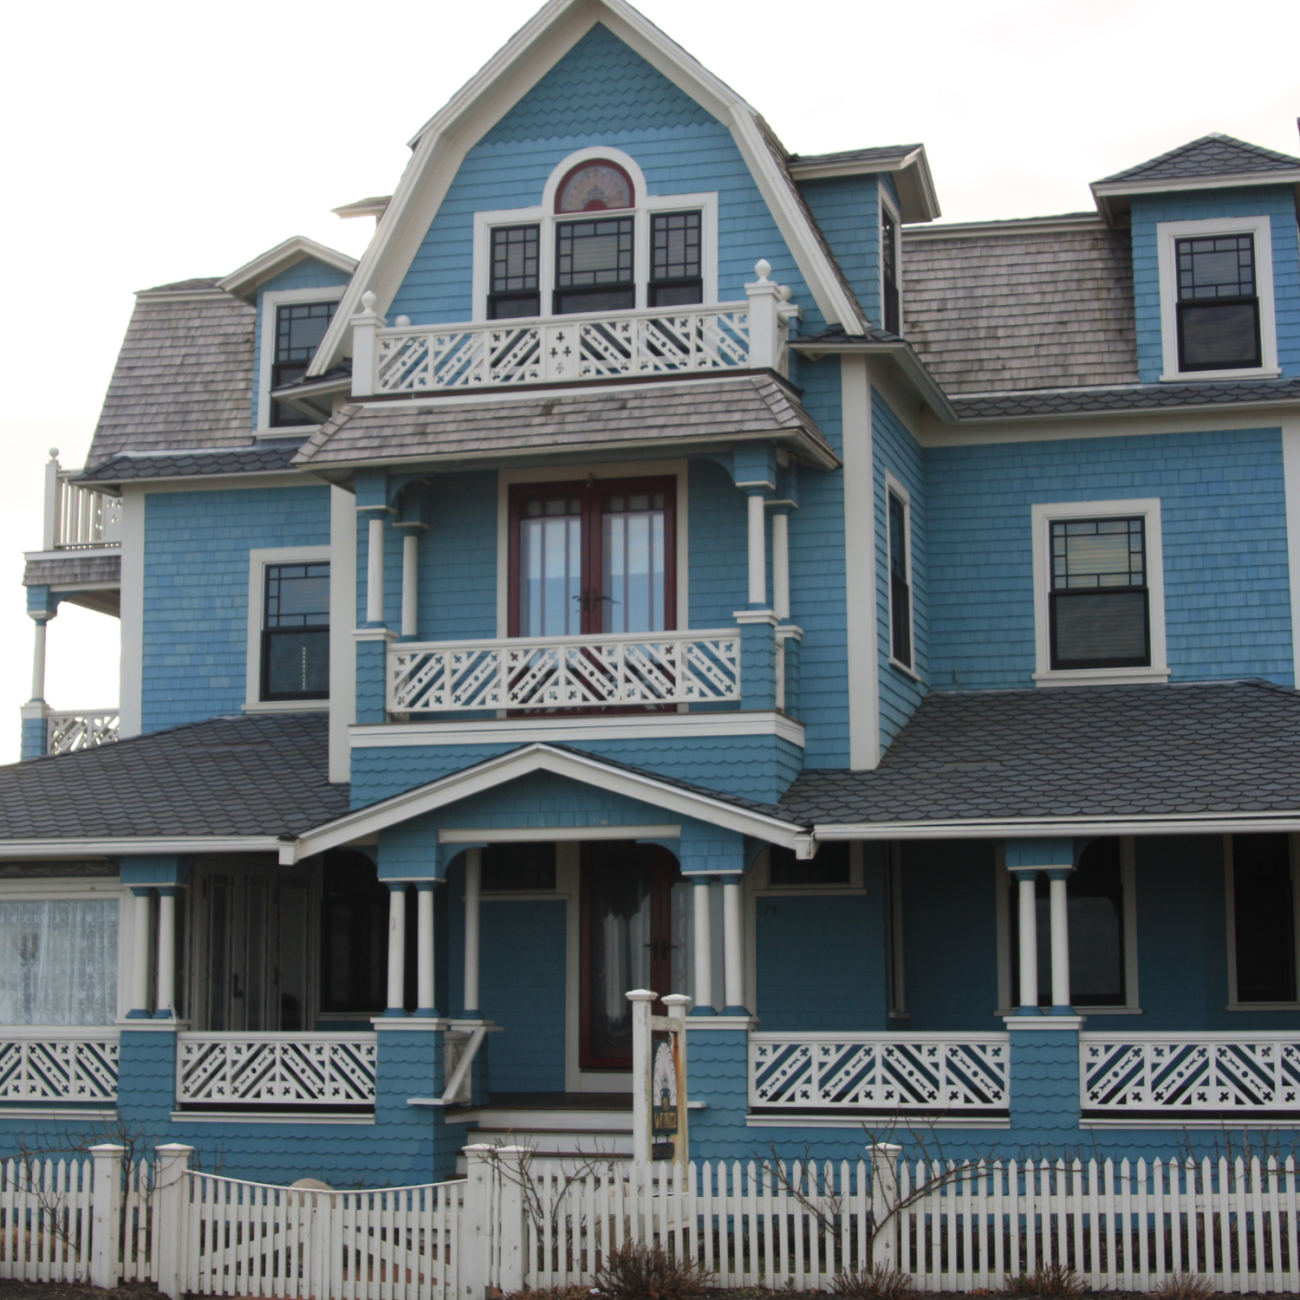 three-story mansion. Light blue, with grey roof. White picket fence.